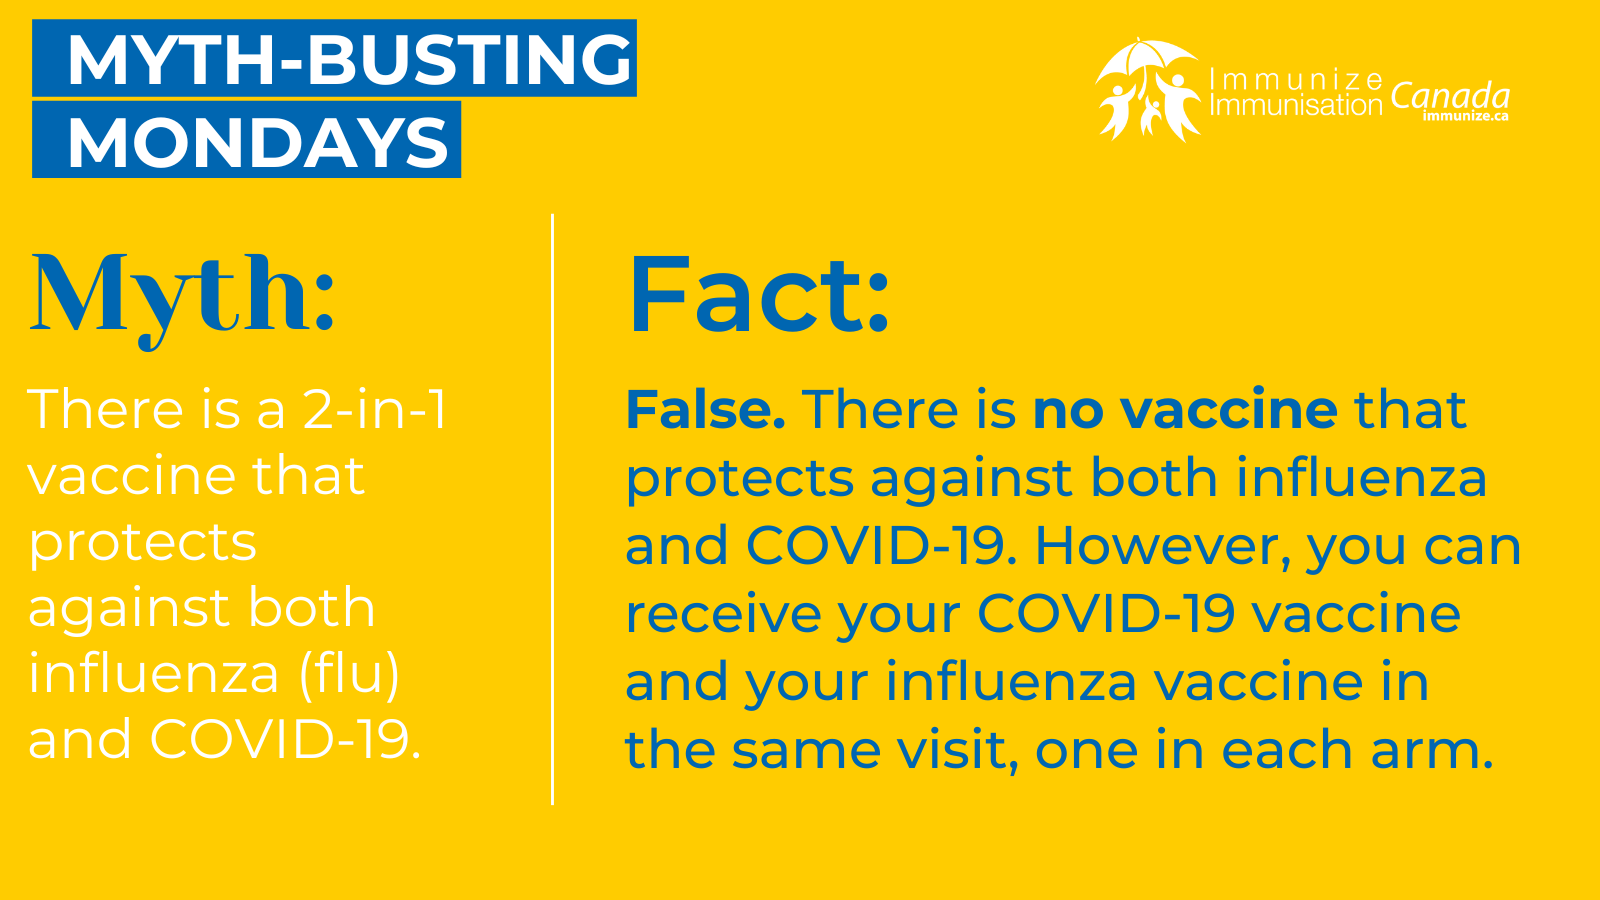 Myth-busting Monday (Twitter/X) - 2-in-1 vaccine